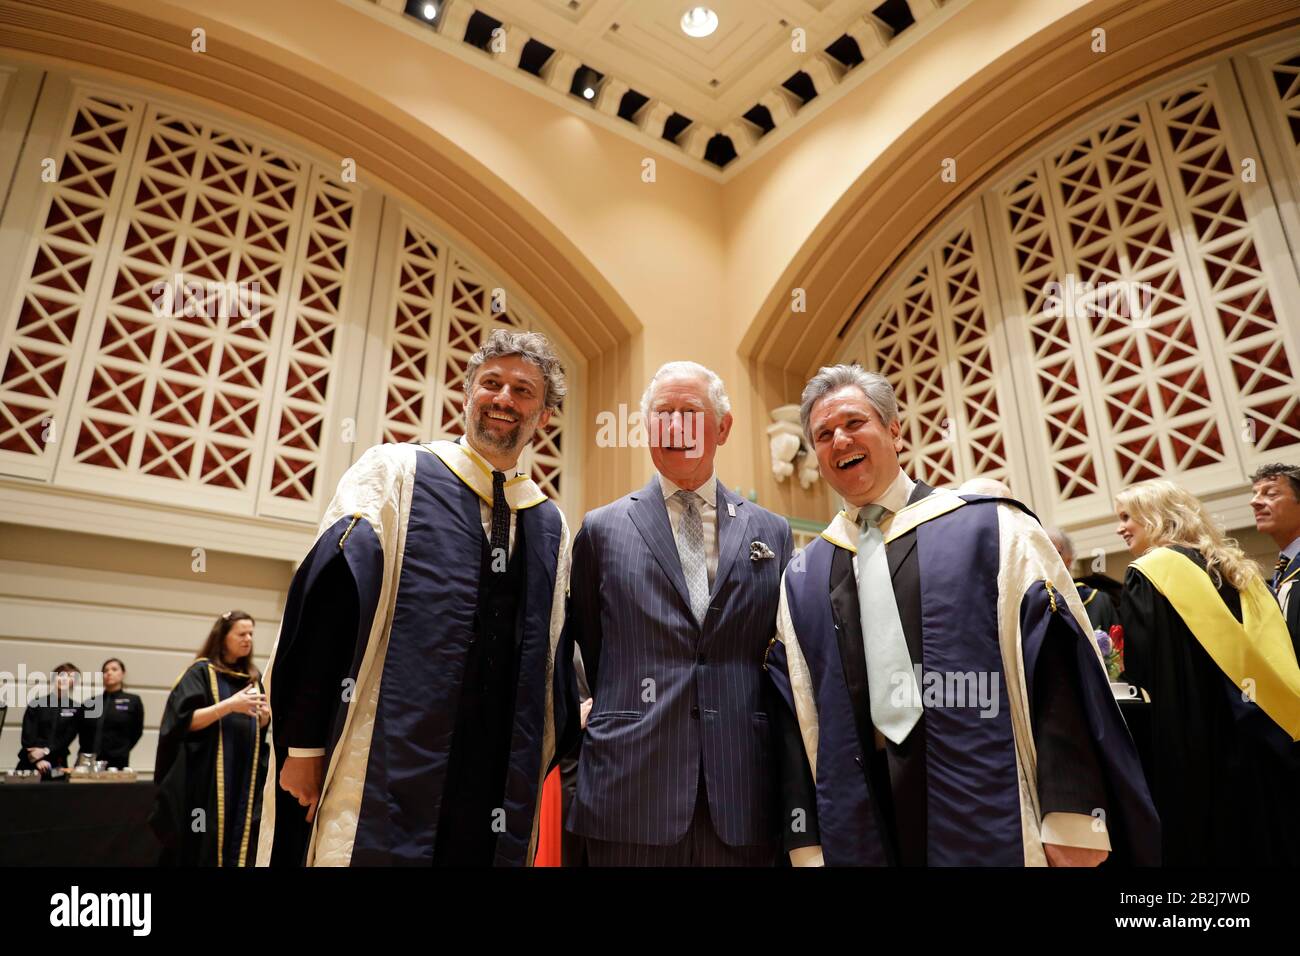 The Prince of Wales with German operatic tenor Jonas Kaufmann (left) and English-Italian conductor and pianist Sir Antonio Pappano during a reception in the new Performance Hall, after presenting them with honorary Doctor of Music awards at the Royal College of Music's annual awards in London. Stock Photo